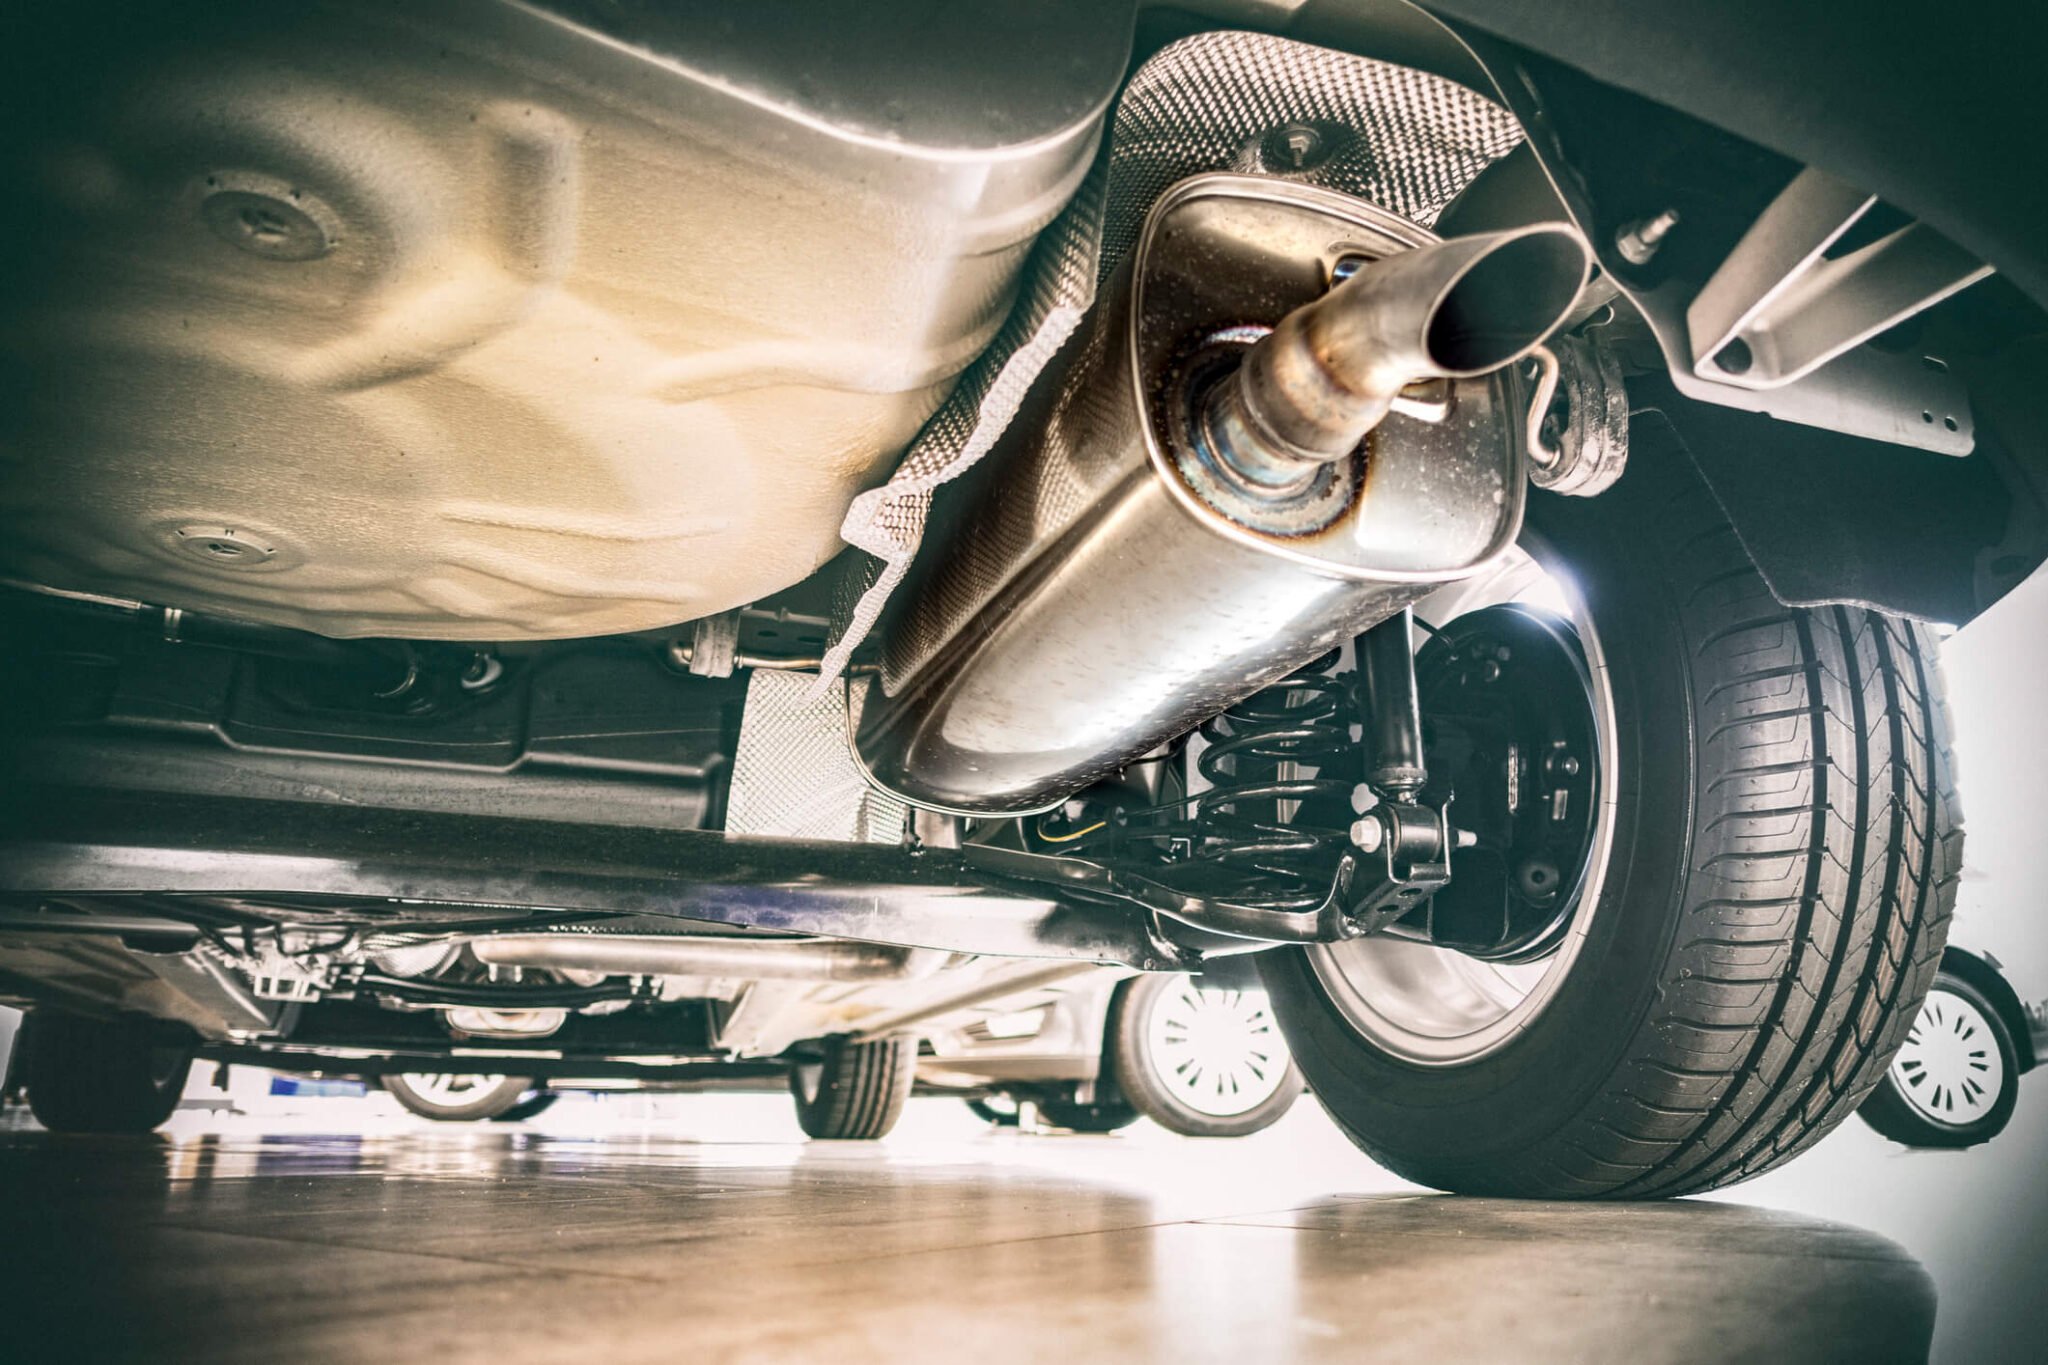 Exhaust Systems - PSL Tuning